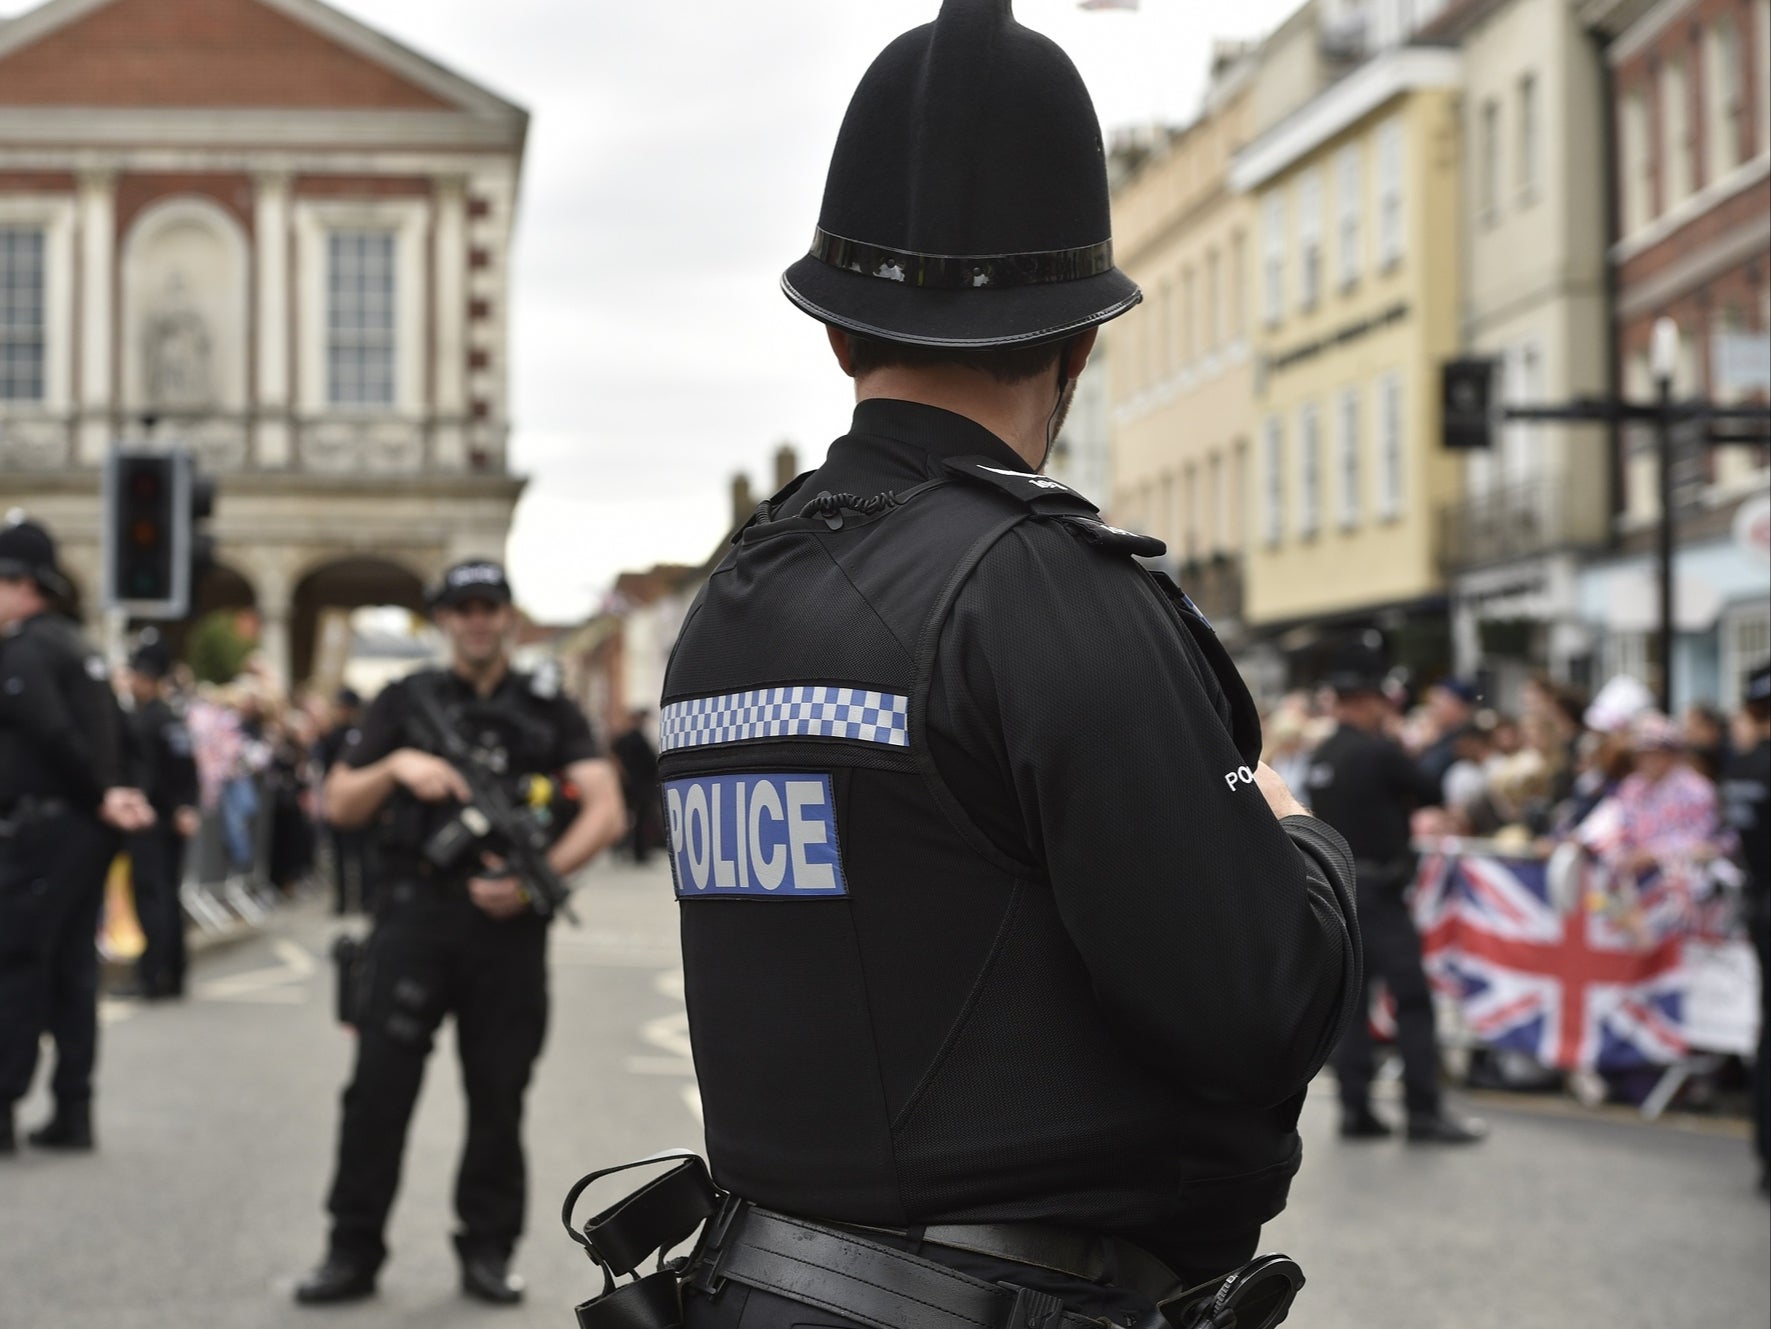 Thames Valley Police are responsible for security in Windsor